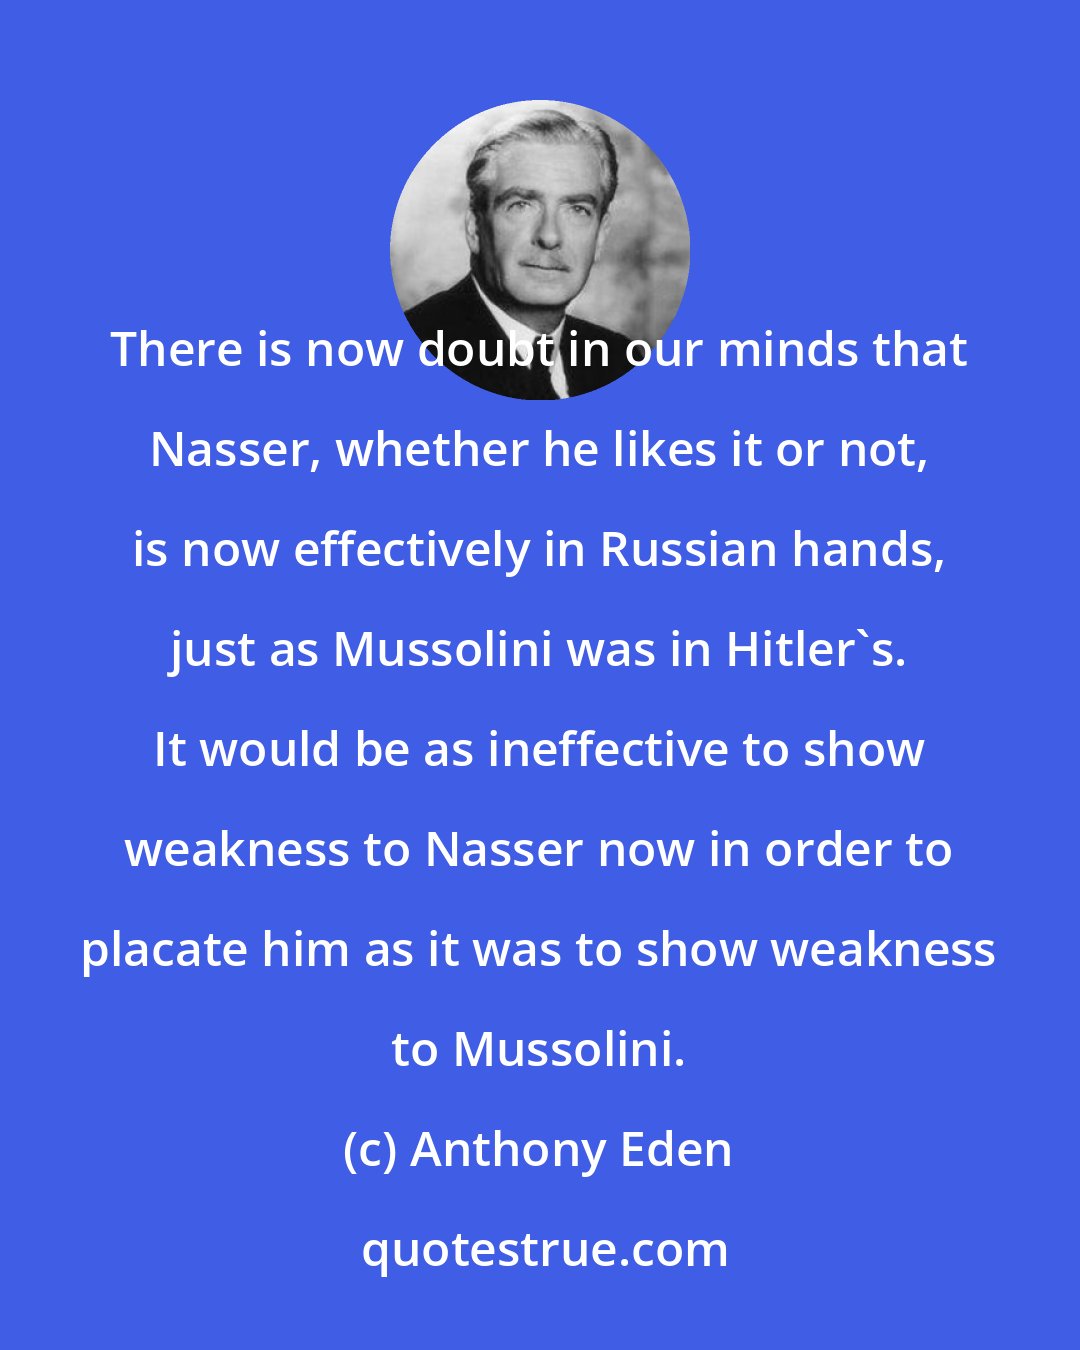 Anthony Eden: There is now doubt in our minds that Nasser, whether he likes it or not, is now effectively in Russian hands, just as Mussolini was in Hitler's. It would be as ineffective to show weakness to Nasser now in order to placate him as it was to show weakness to Mussolini.